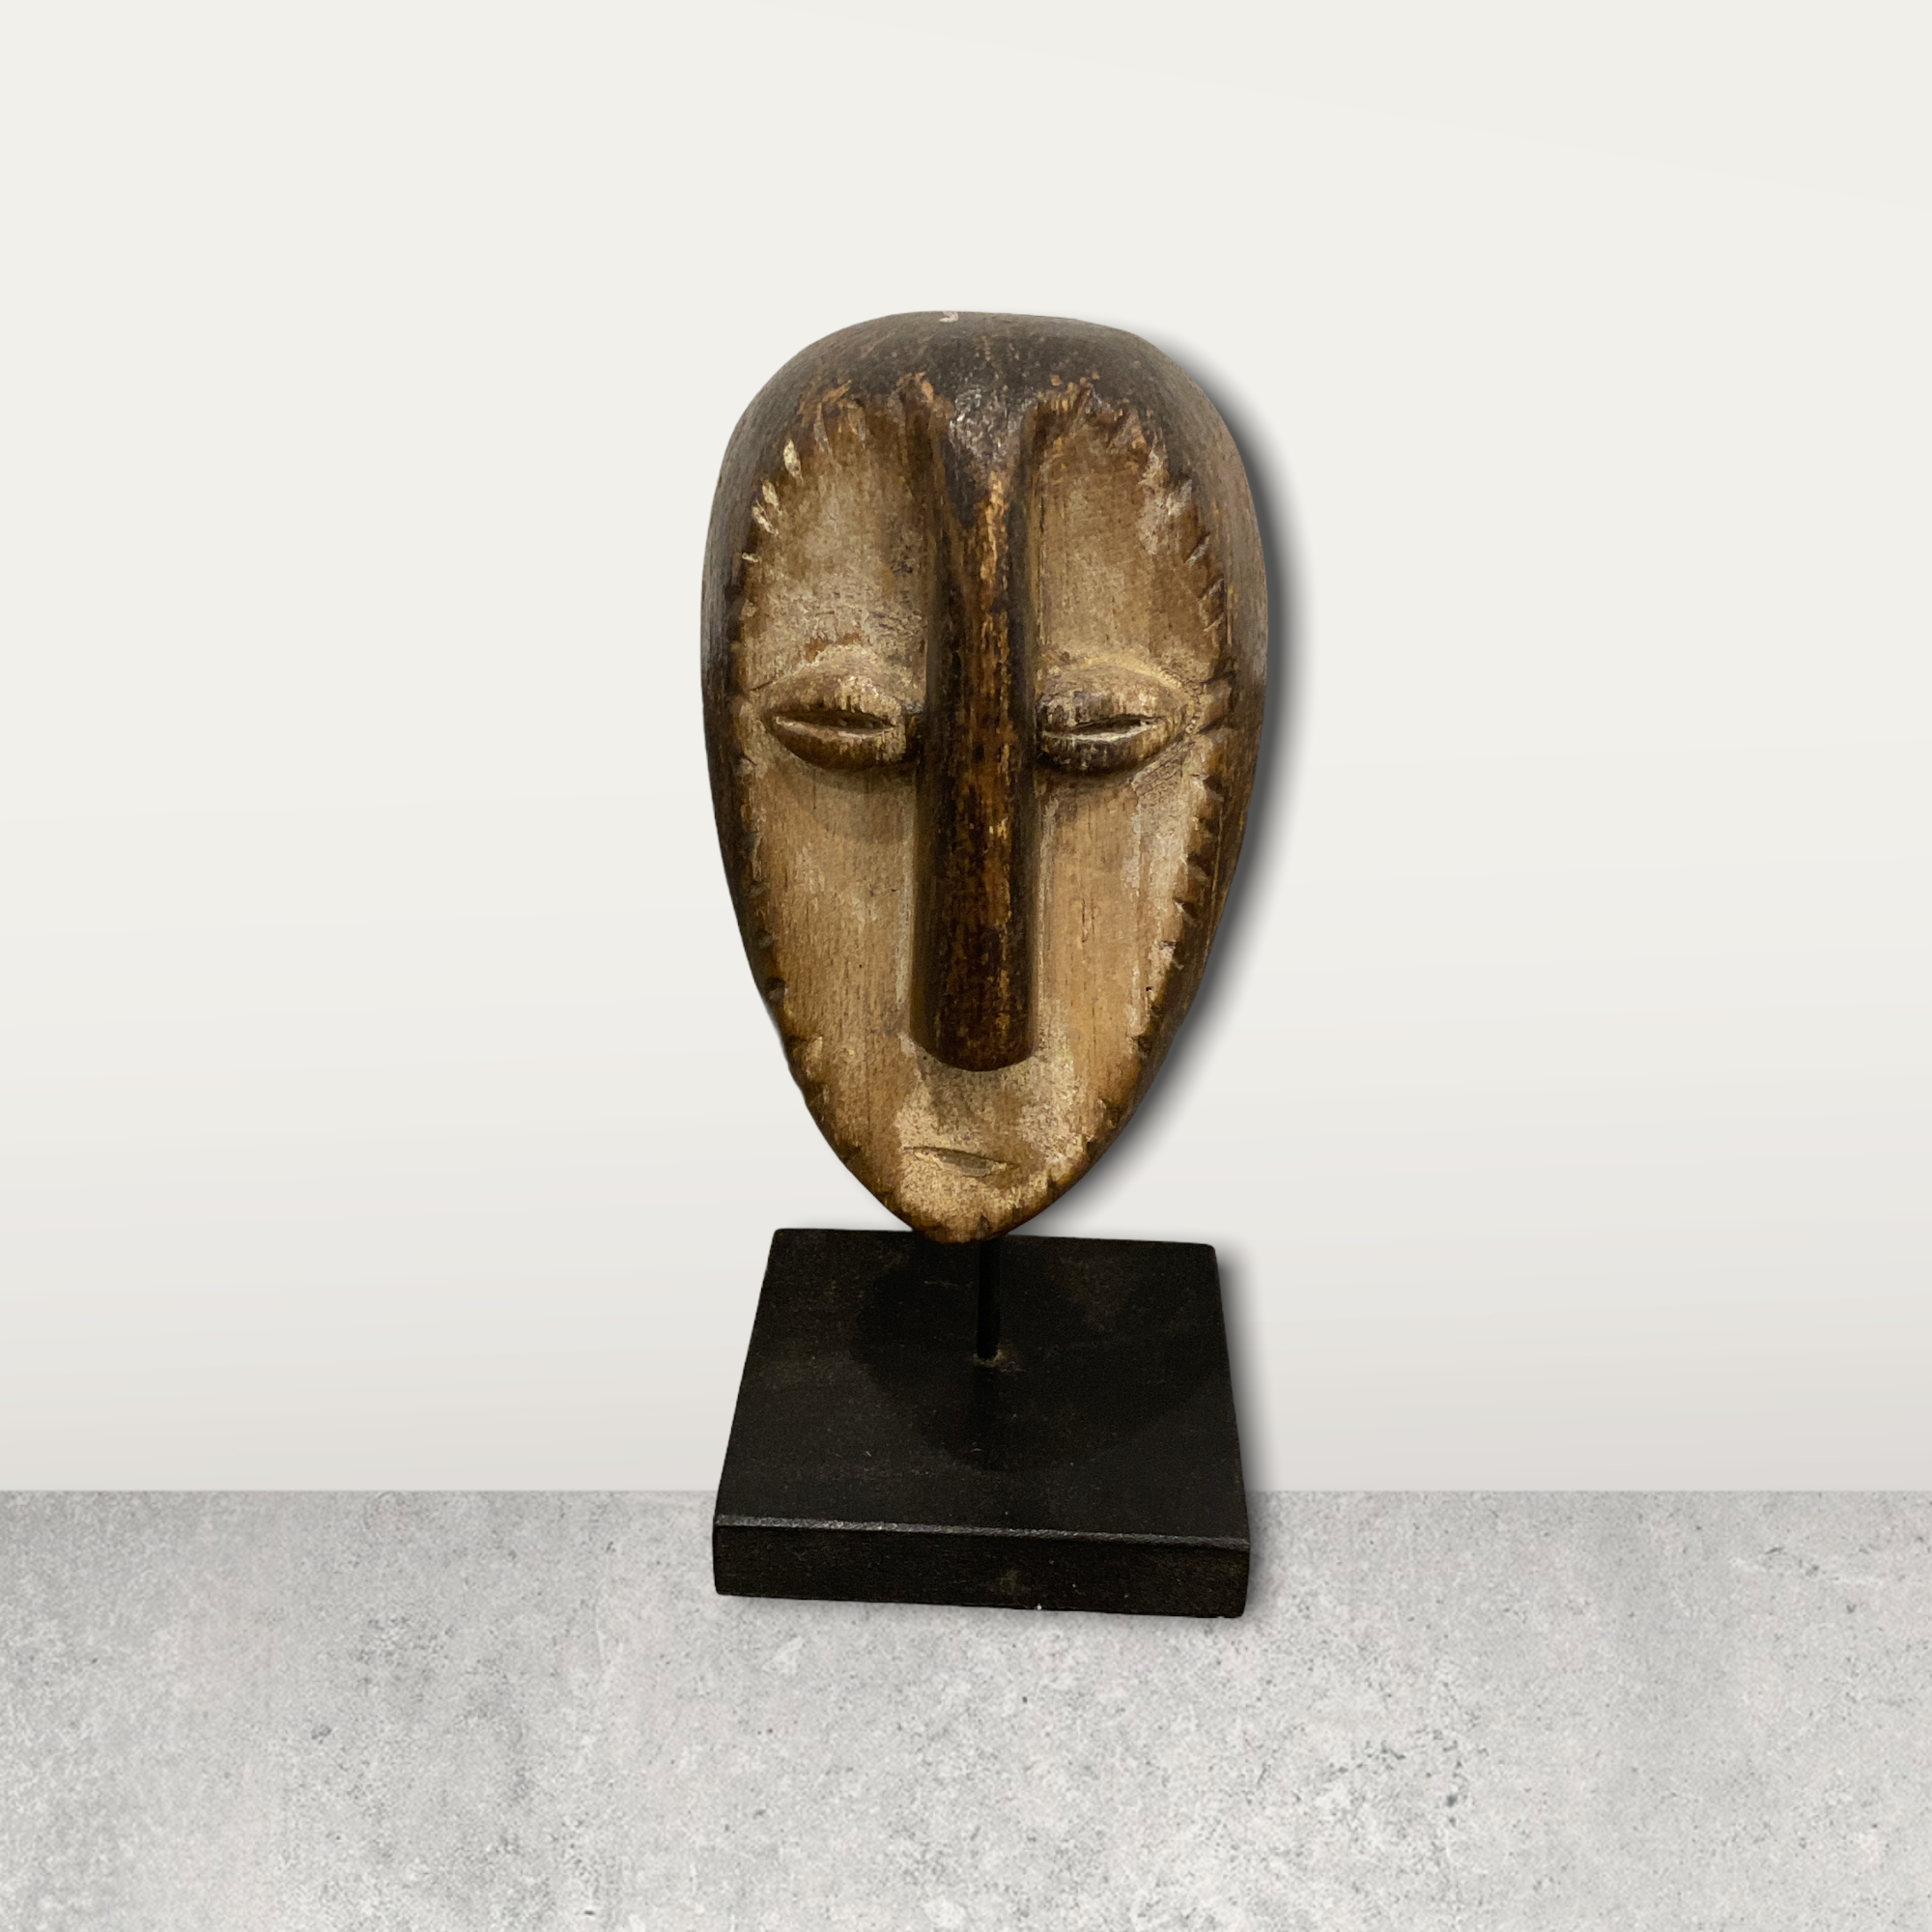 Small African mask on stand